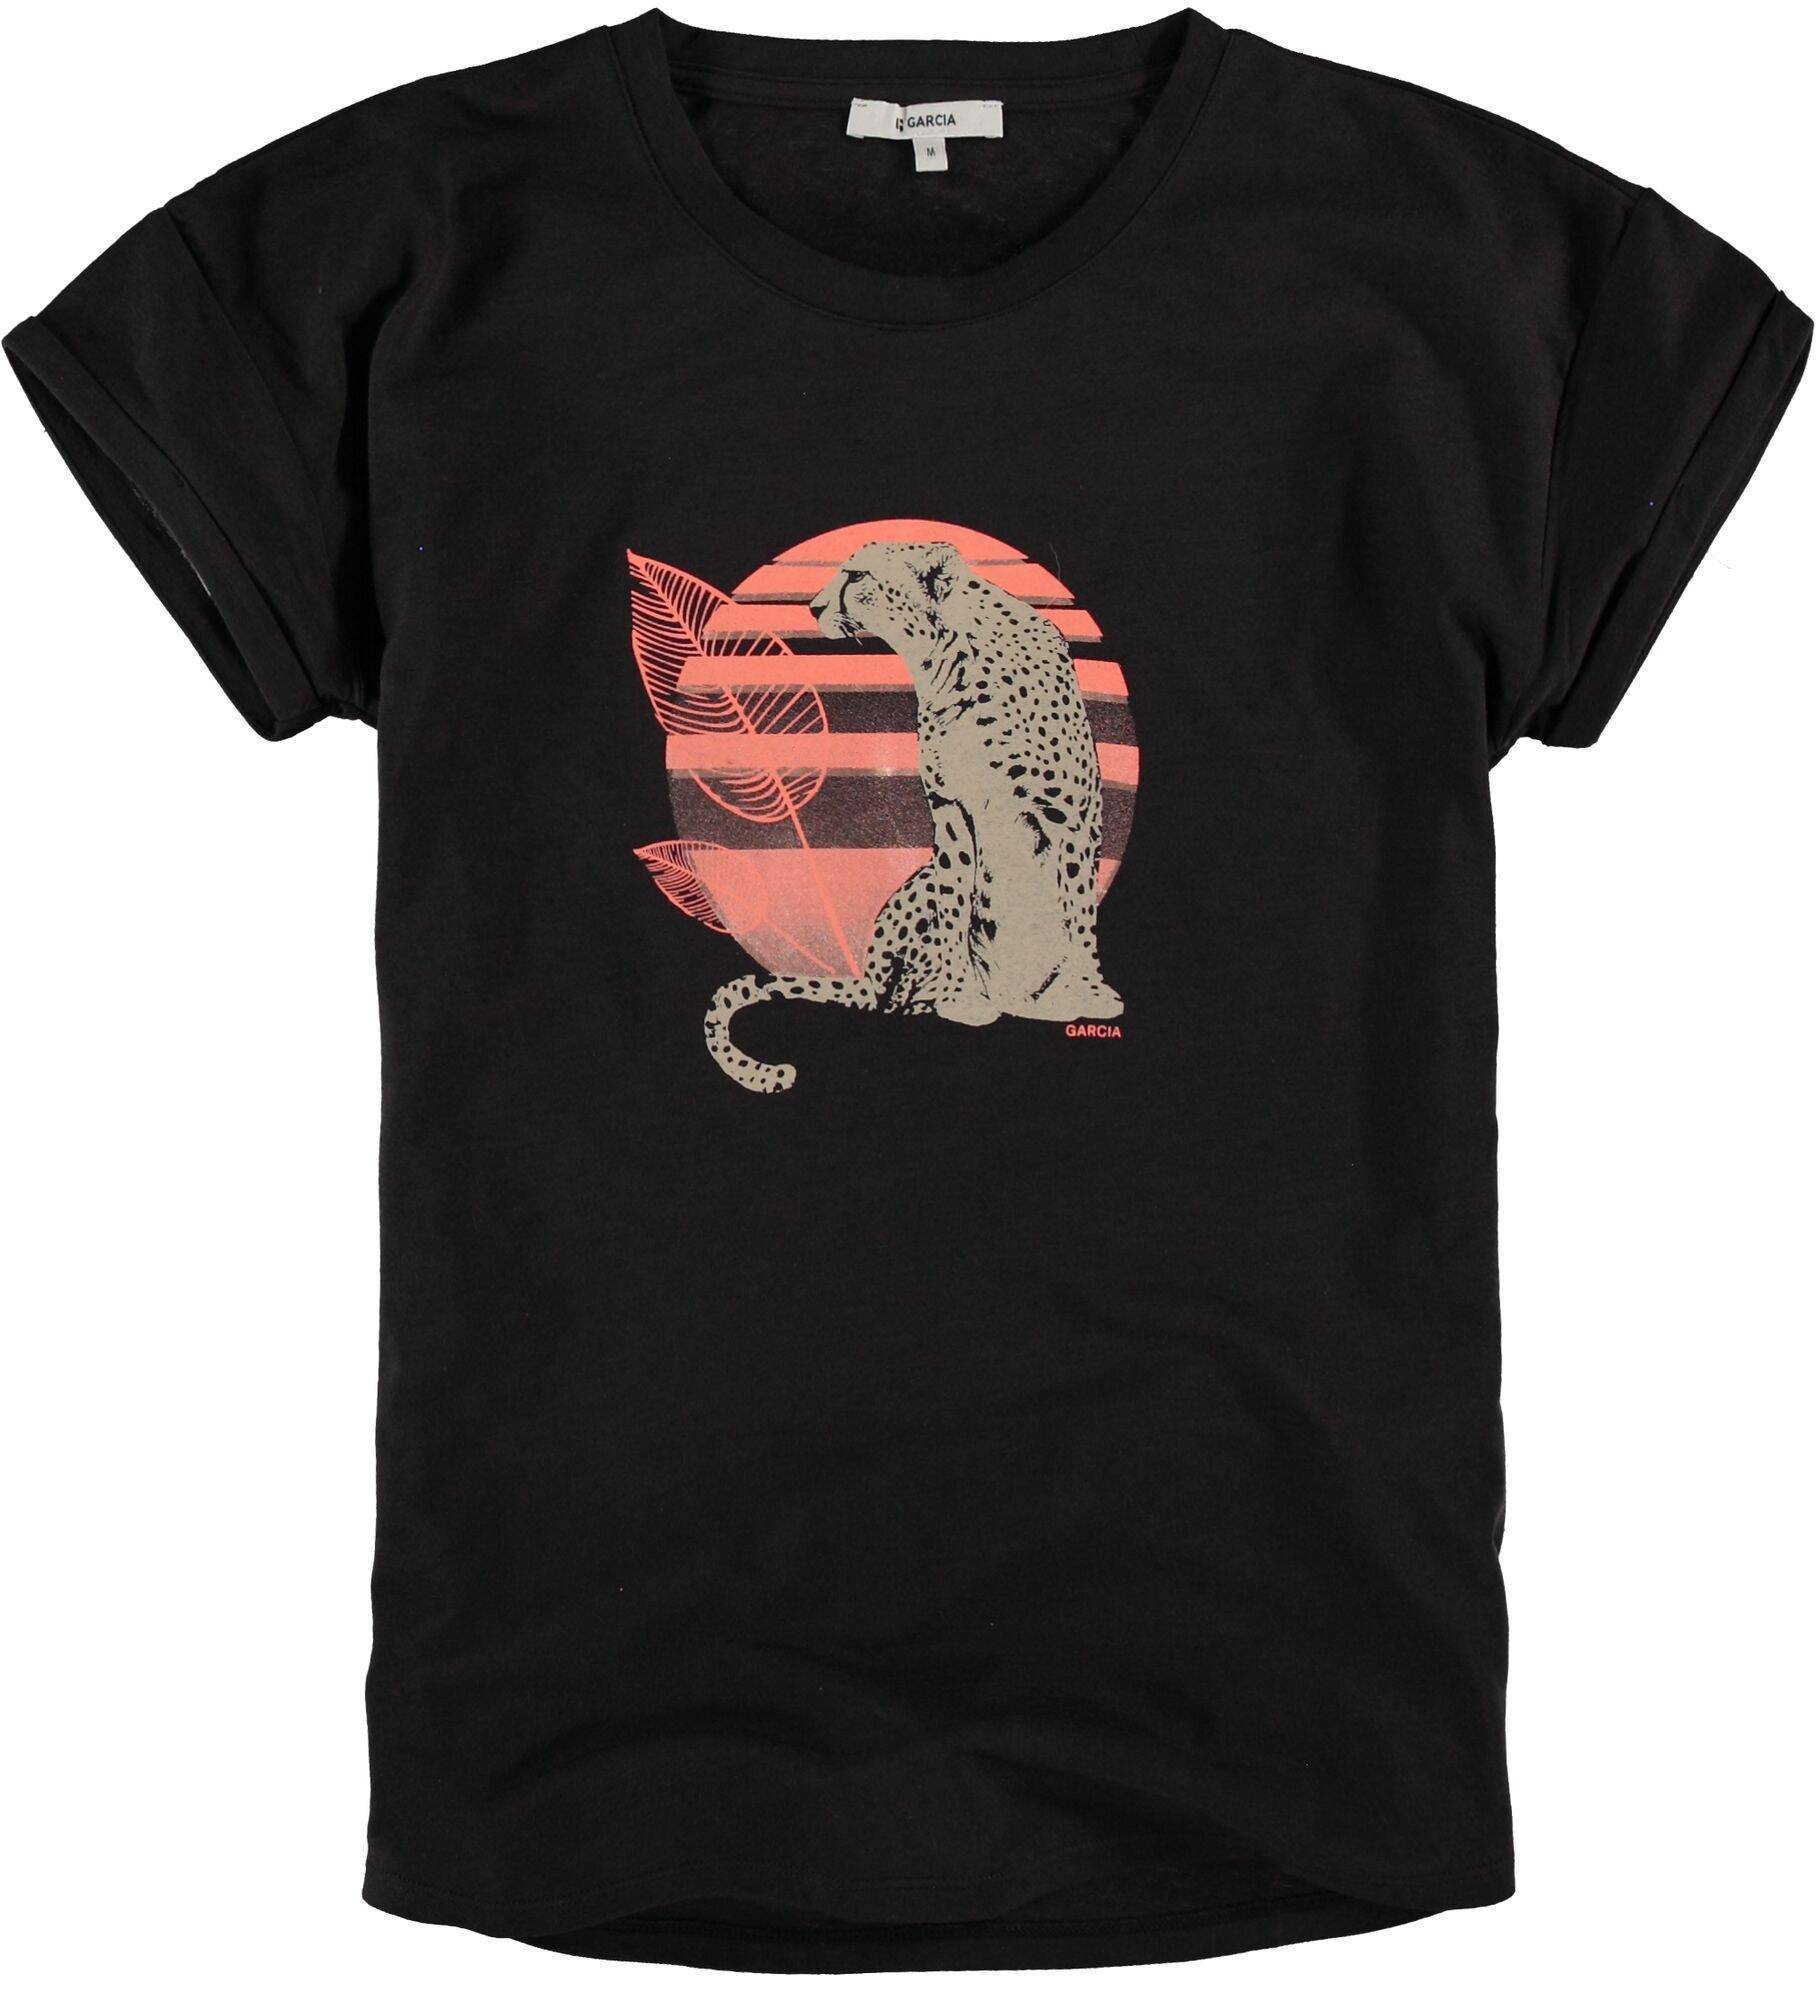 Garcia Black T-shirt with Gepard print - Your Style Your Story